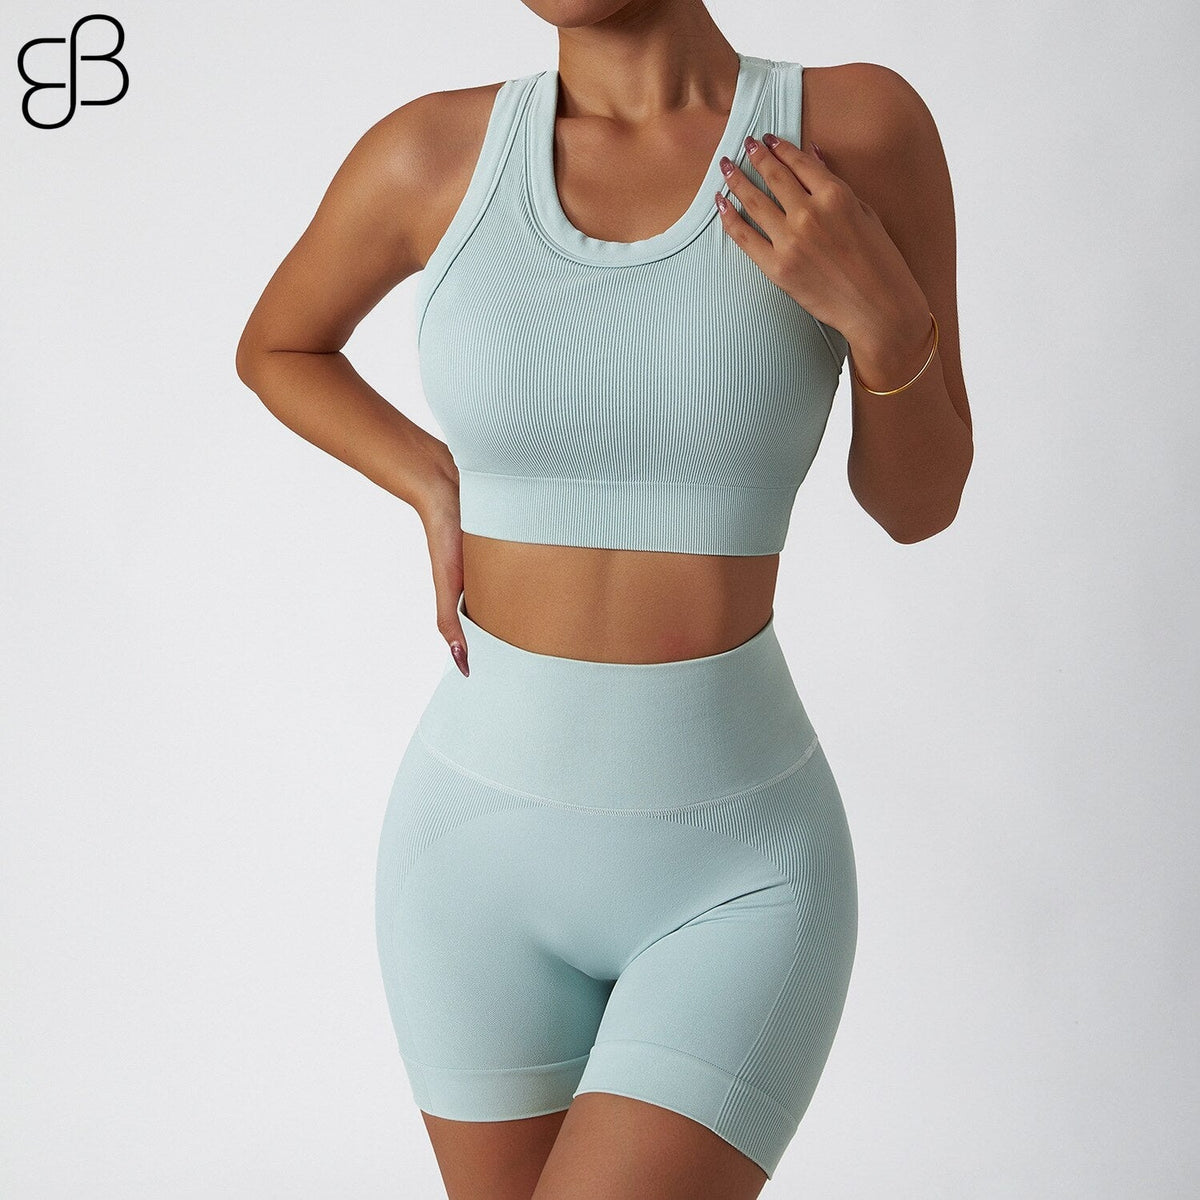 Sexy FitnSets Women Sports Sets Sport Suit Women 2 Piece Set Gym Clothes  Womens Clothing Sports Bra Active Wear Yoga Shorts X0629